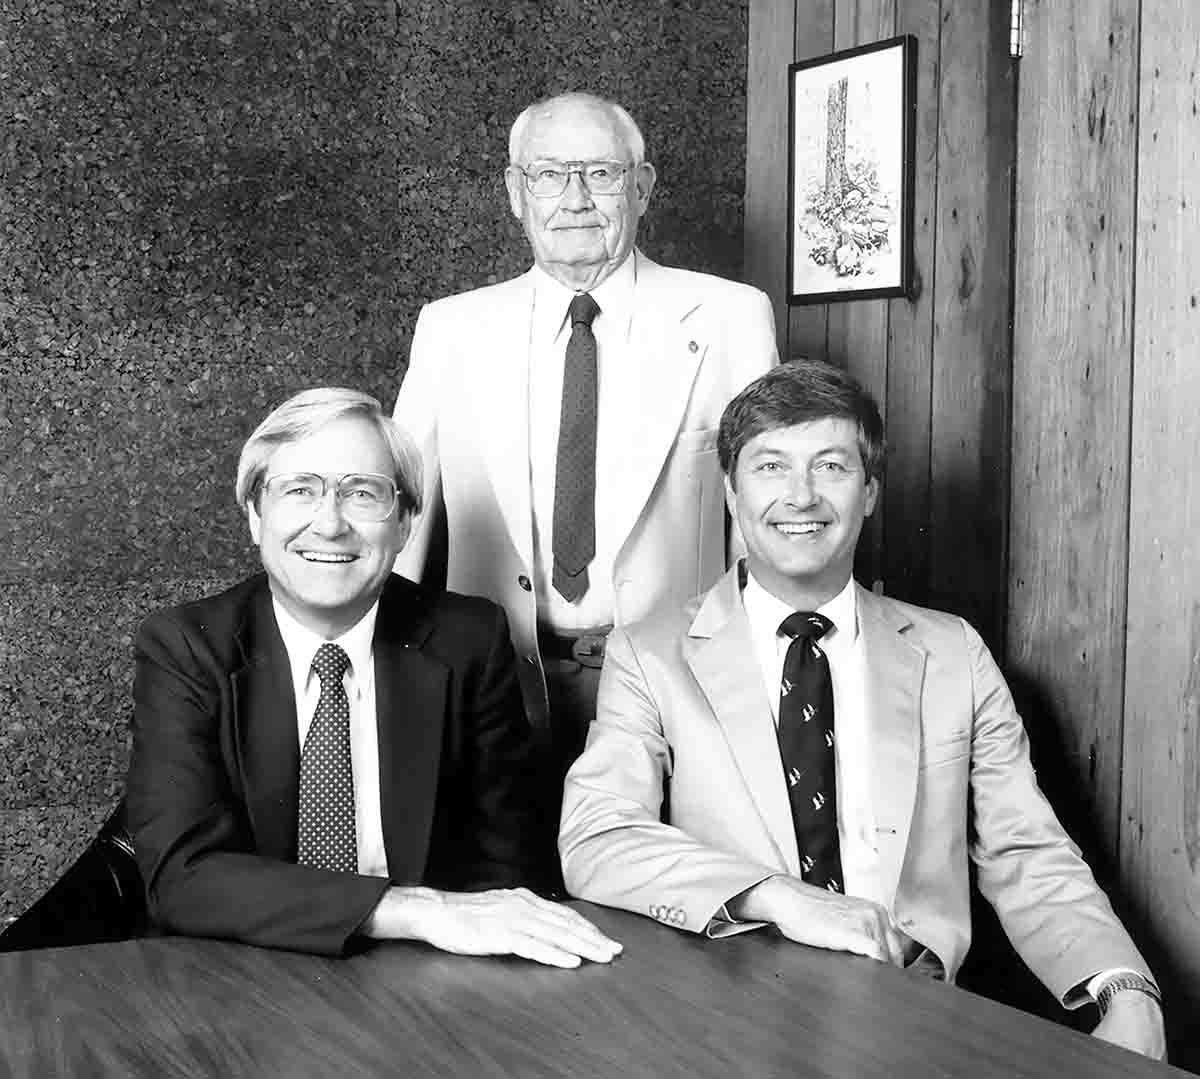 Hodgdon was founded as a family owned and operated company. Bruce Hodgdon (standing) with his two sons Robert E. Hodgdon (left)  and J.B. Hodgdon (right).